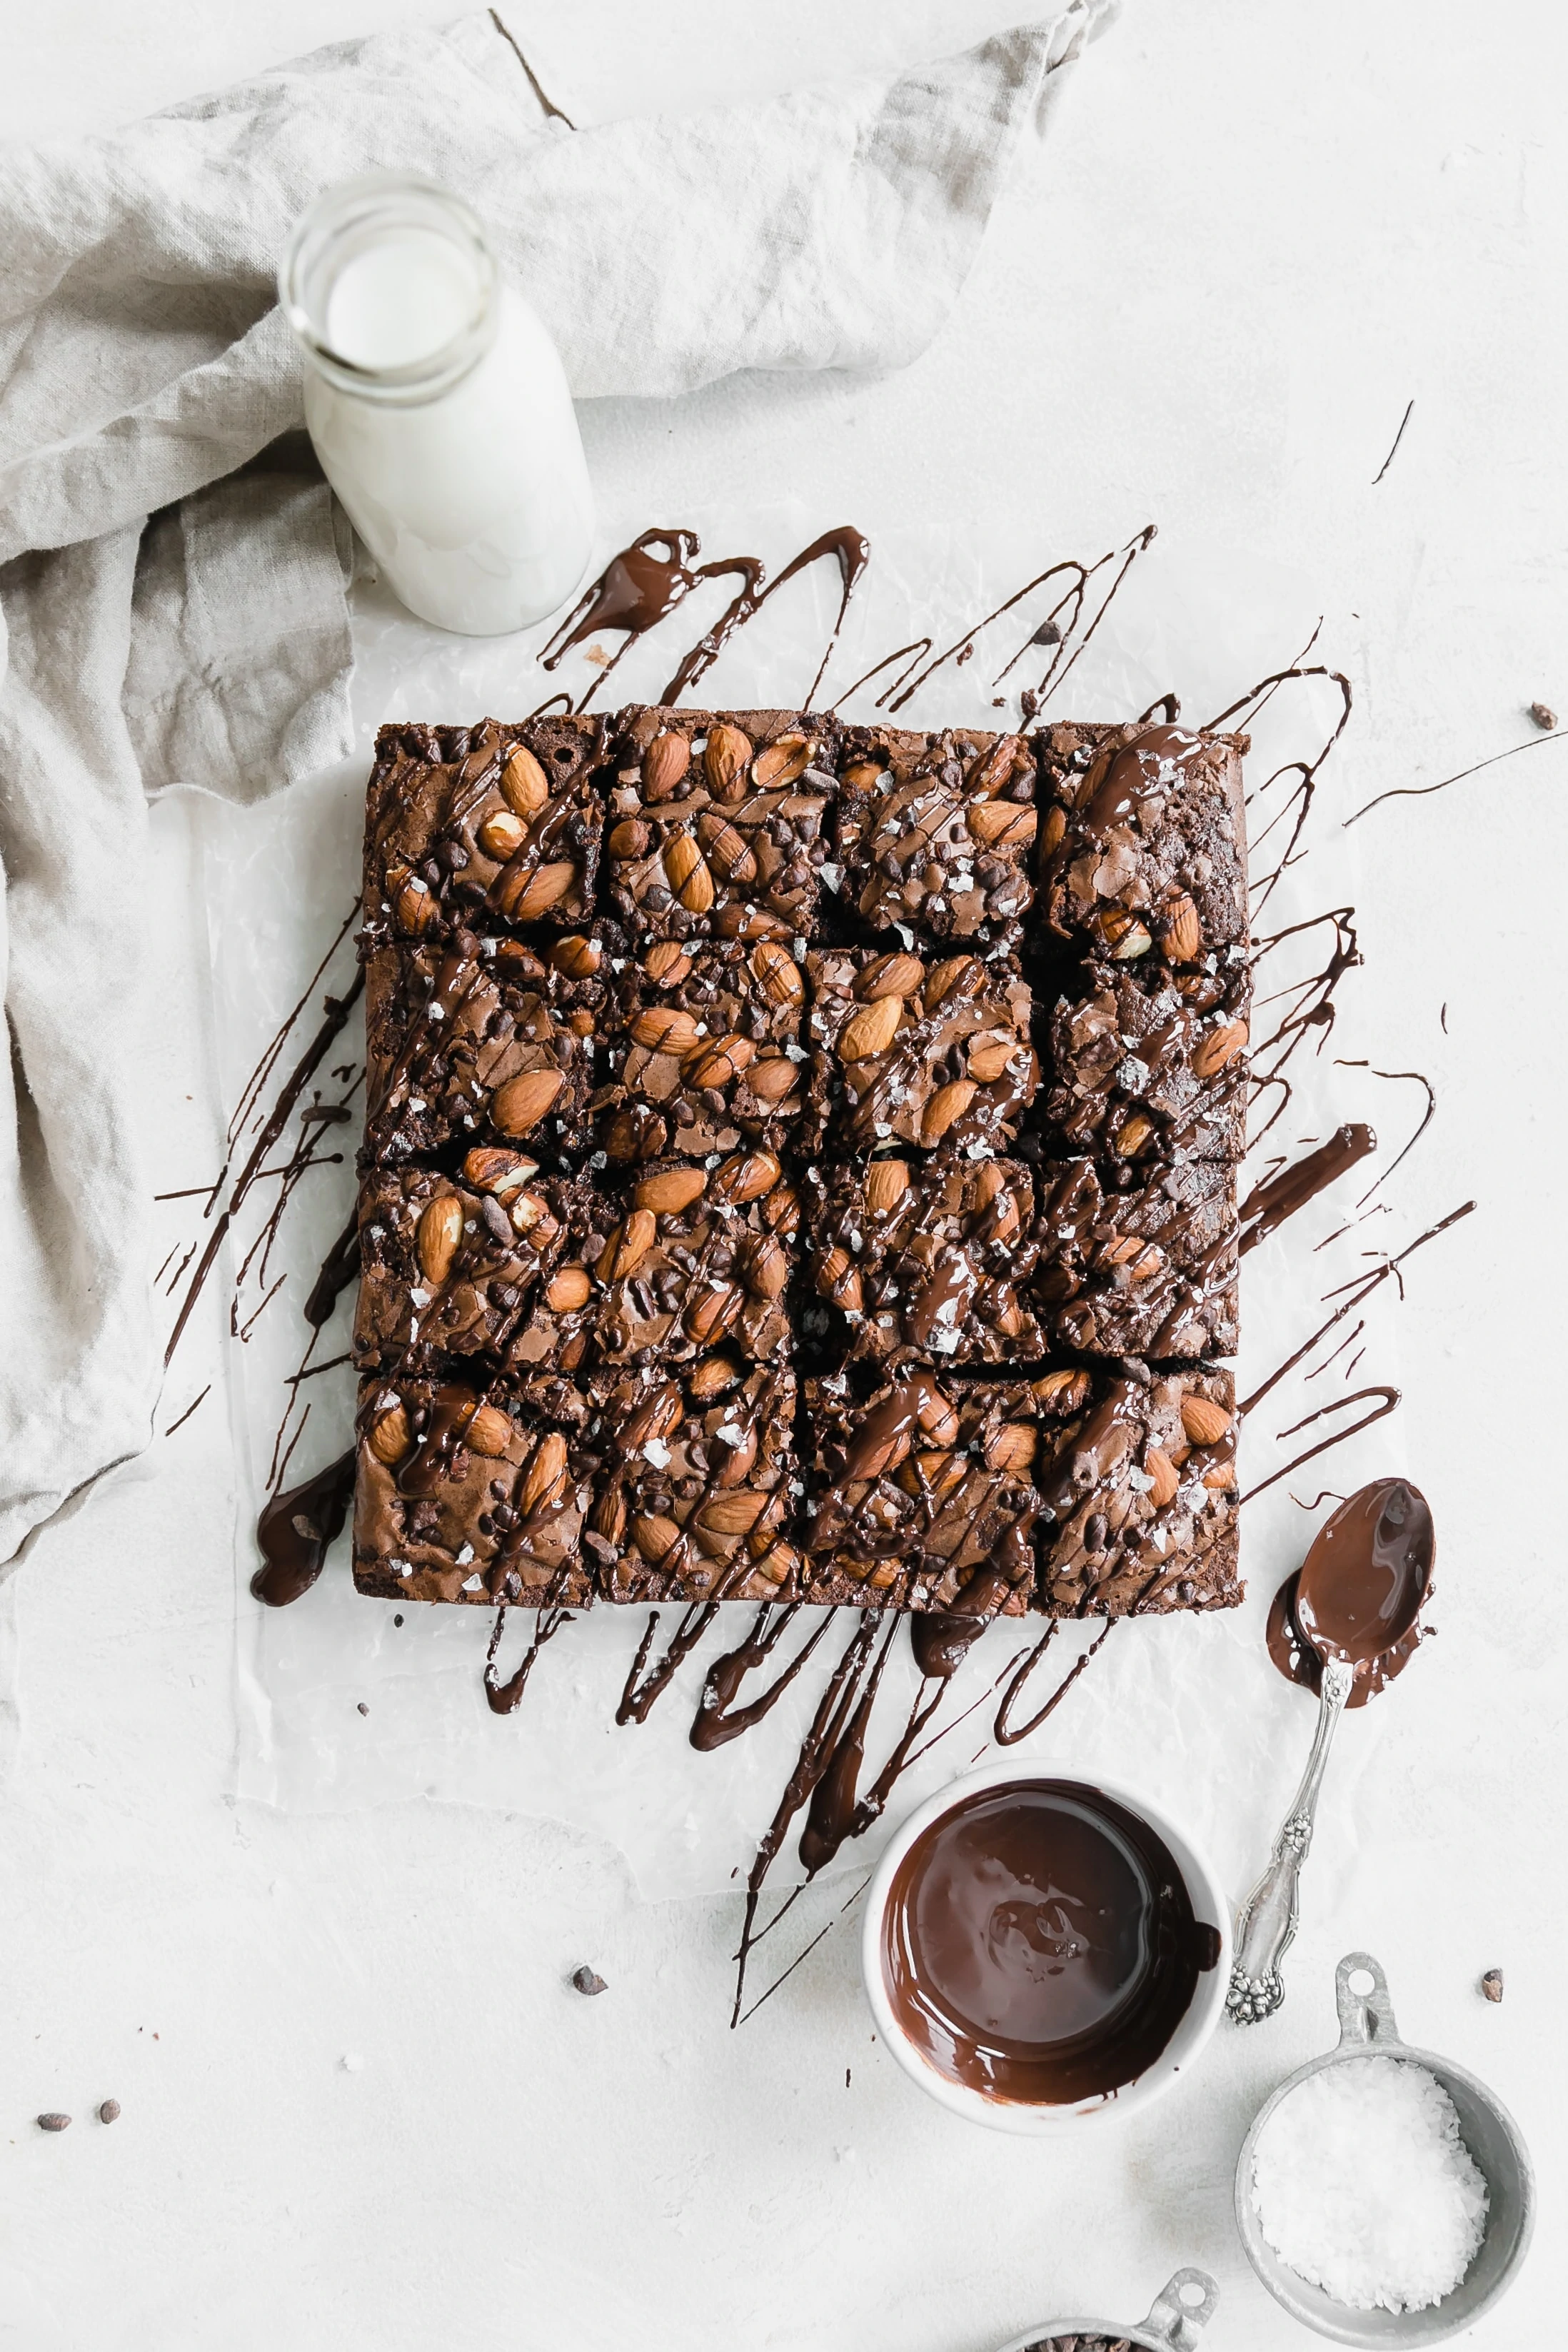 boxed brownies with chocolate drizzle and almonds